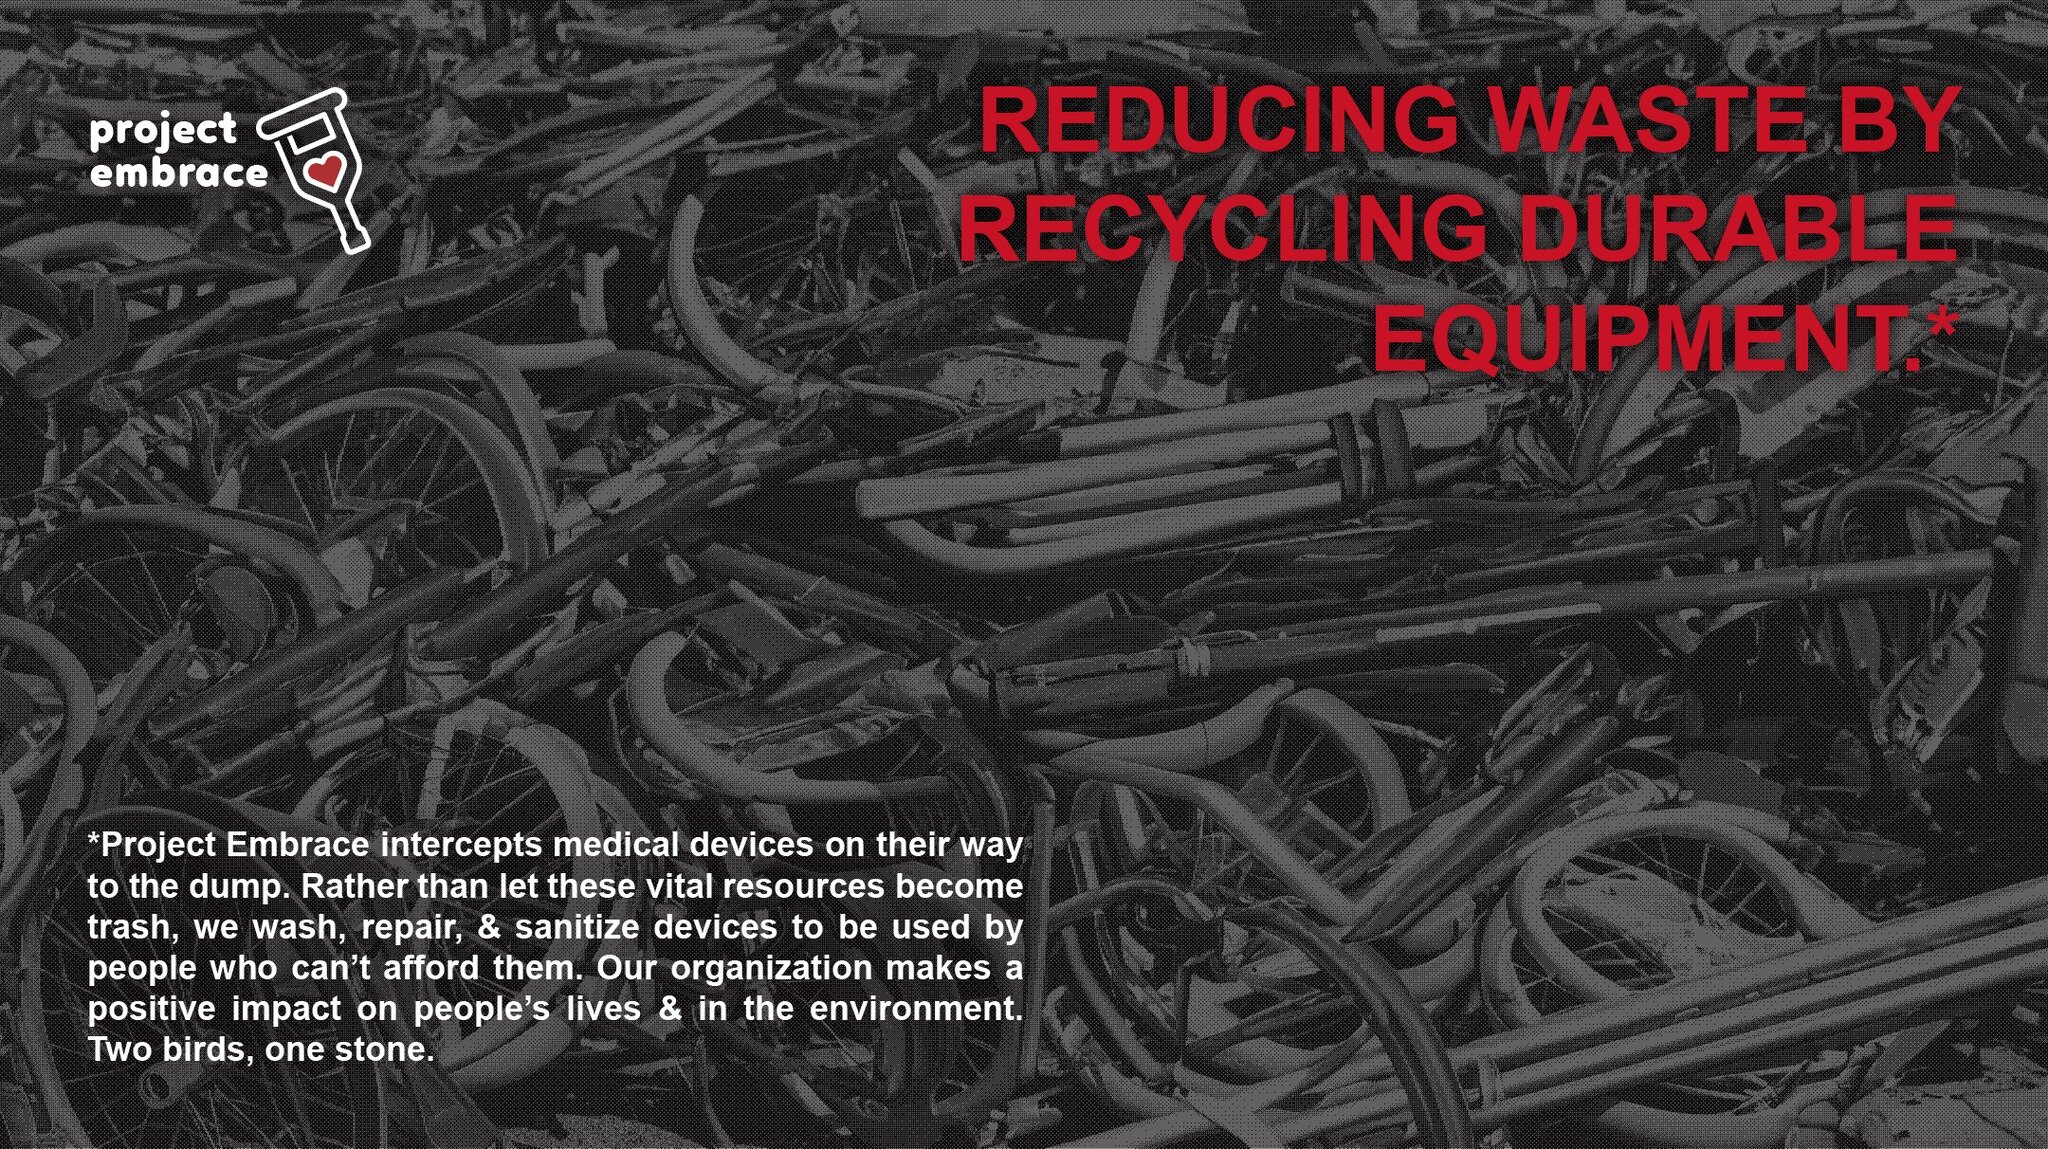 REDUCING WASTE BY RECYCLING DURABLE EQUIPMENT.*

---

*Project Embrace intercepts medical devices on their way to the dump. Rather than let these vital resources become trash, we wash, repair, &amp; sanitize devices to be used by people who can&rsquo